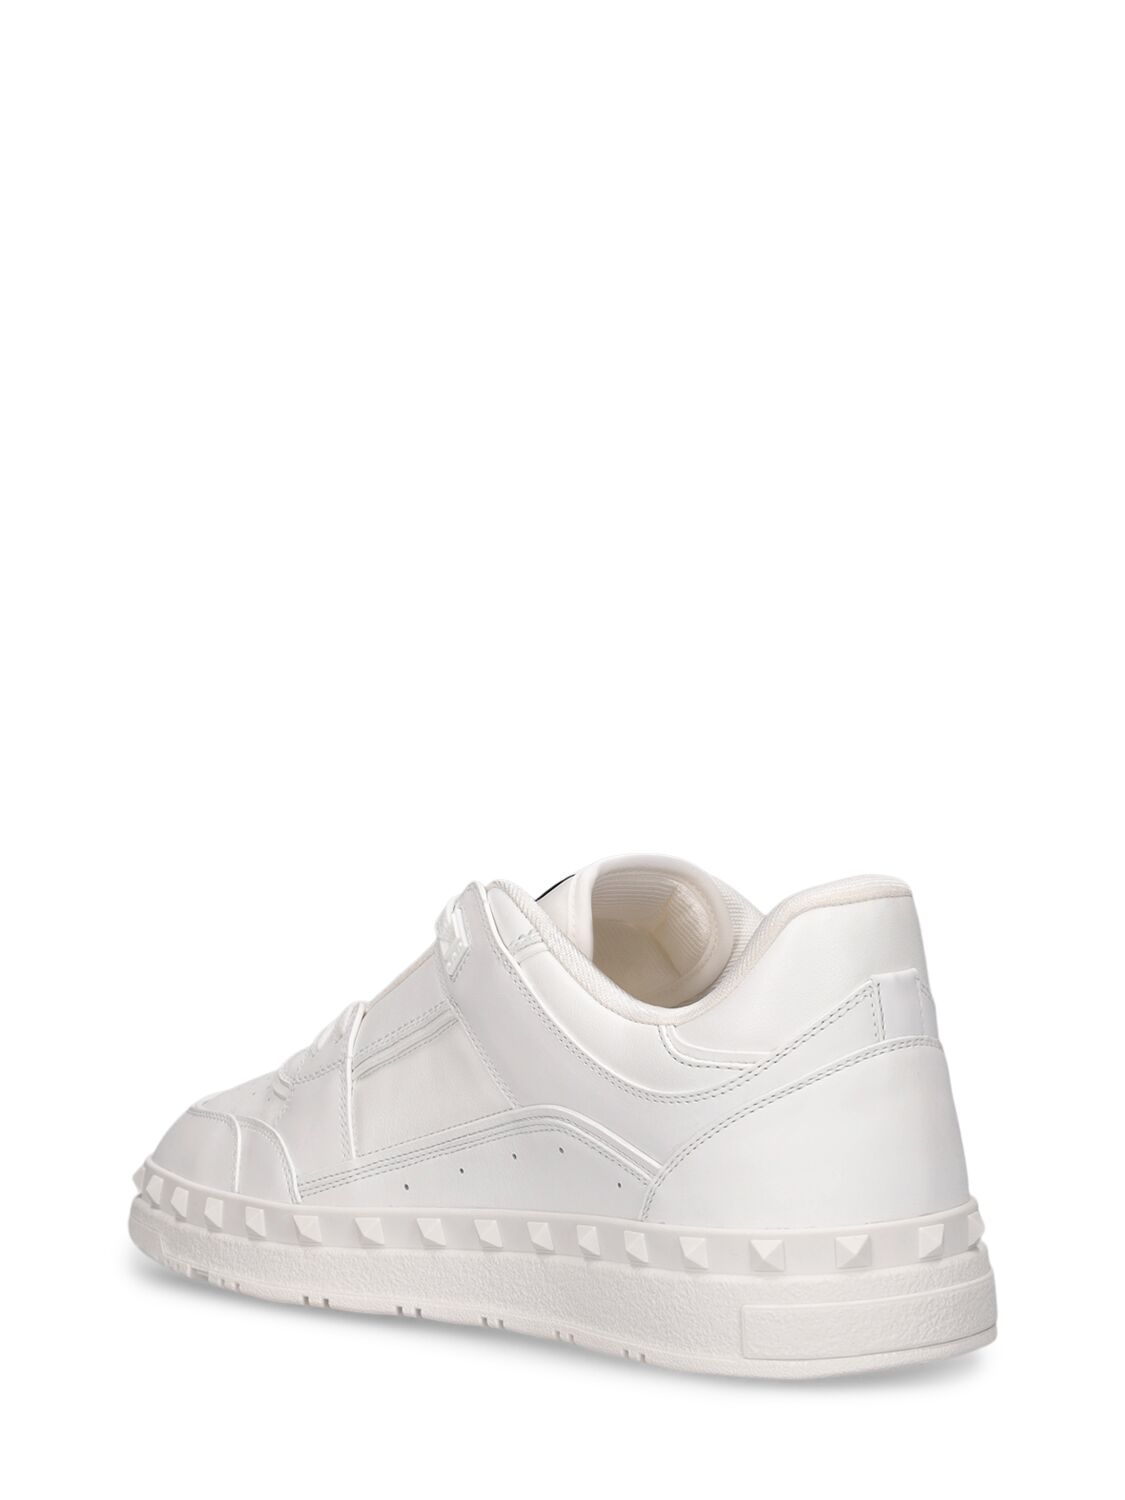 Shop Valentino Freedots Leather Low Top Sneakers In White